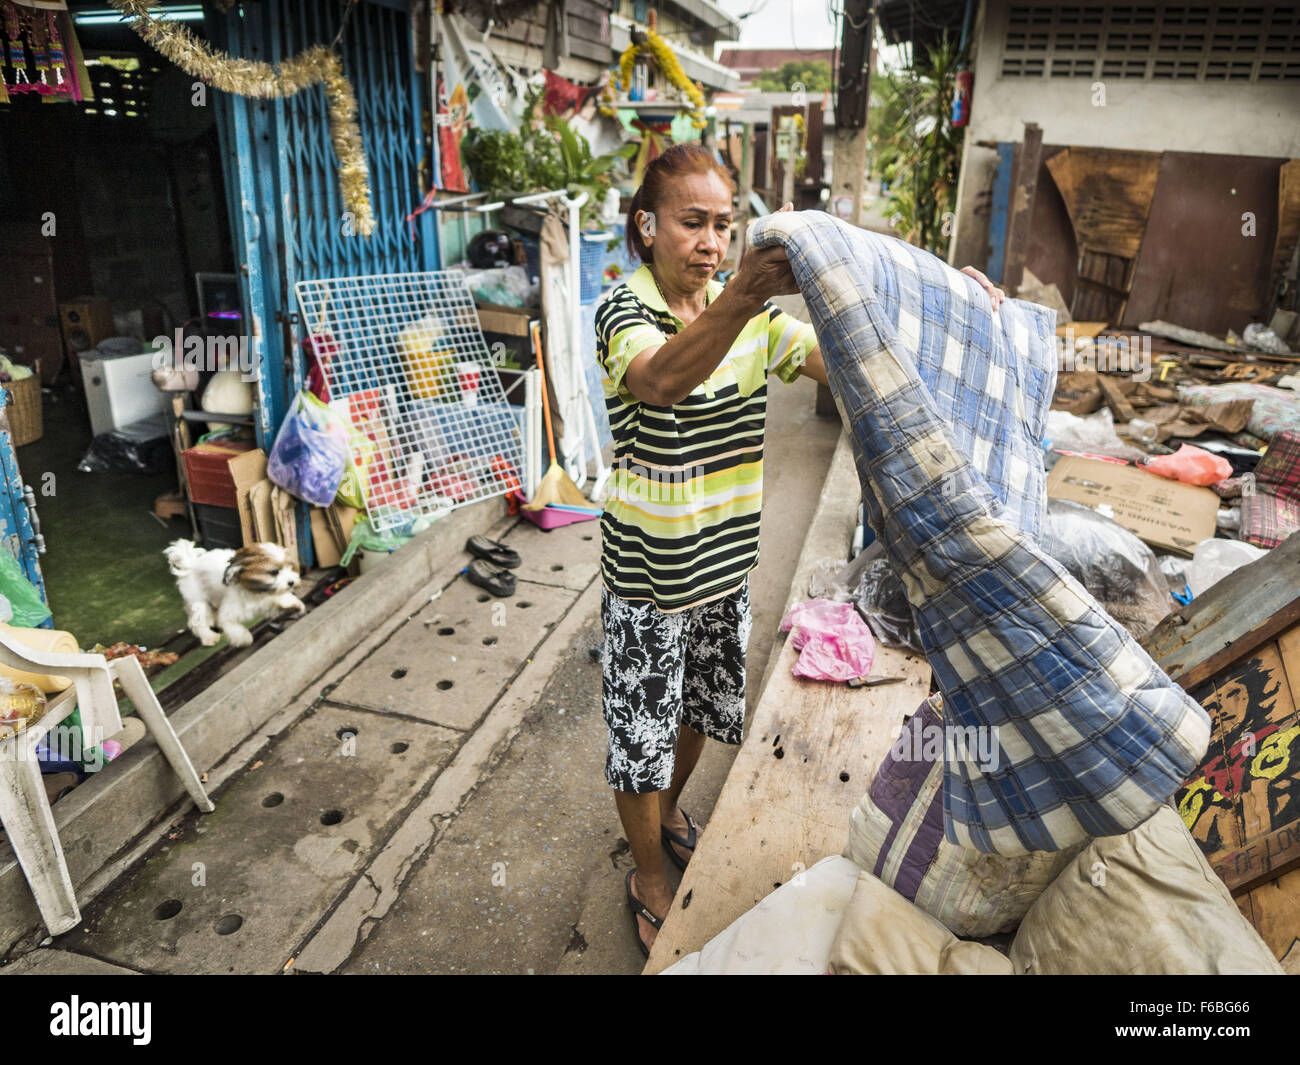 Nov. 12, 2015 - Bangkok, Bangkok, Thailand - A resident of the  Wat Kalayanmit neighborhood hangs out a quilt on the day she was being evicted. Fifty-four homes around Wat Kalayanamit, a historic Buddhist temple on the Chao Phraya River in the Thonburi section of Bangkok, are being razed and the residents evicted to make way for new development at the temple. The abbot of the temple said he was evicting the residents, who have lived on the temple grounds for generations, because their homes are unsafe and because he wants to improve the temple grounds. The evictions are a part of a Bangkok tre Stock Photo